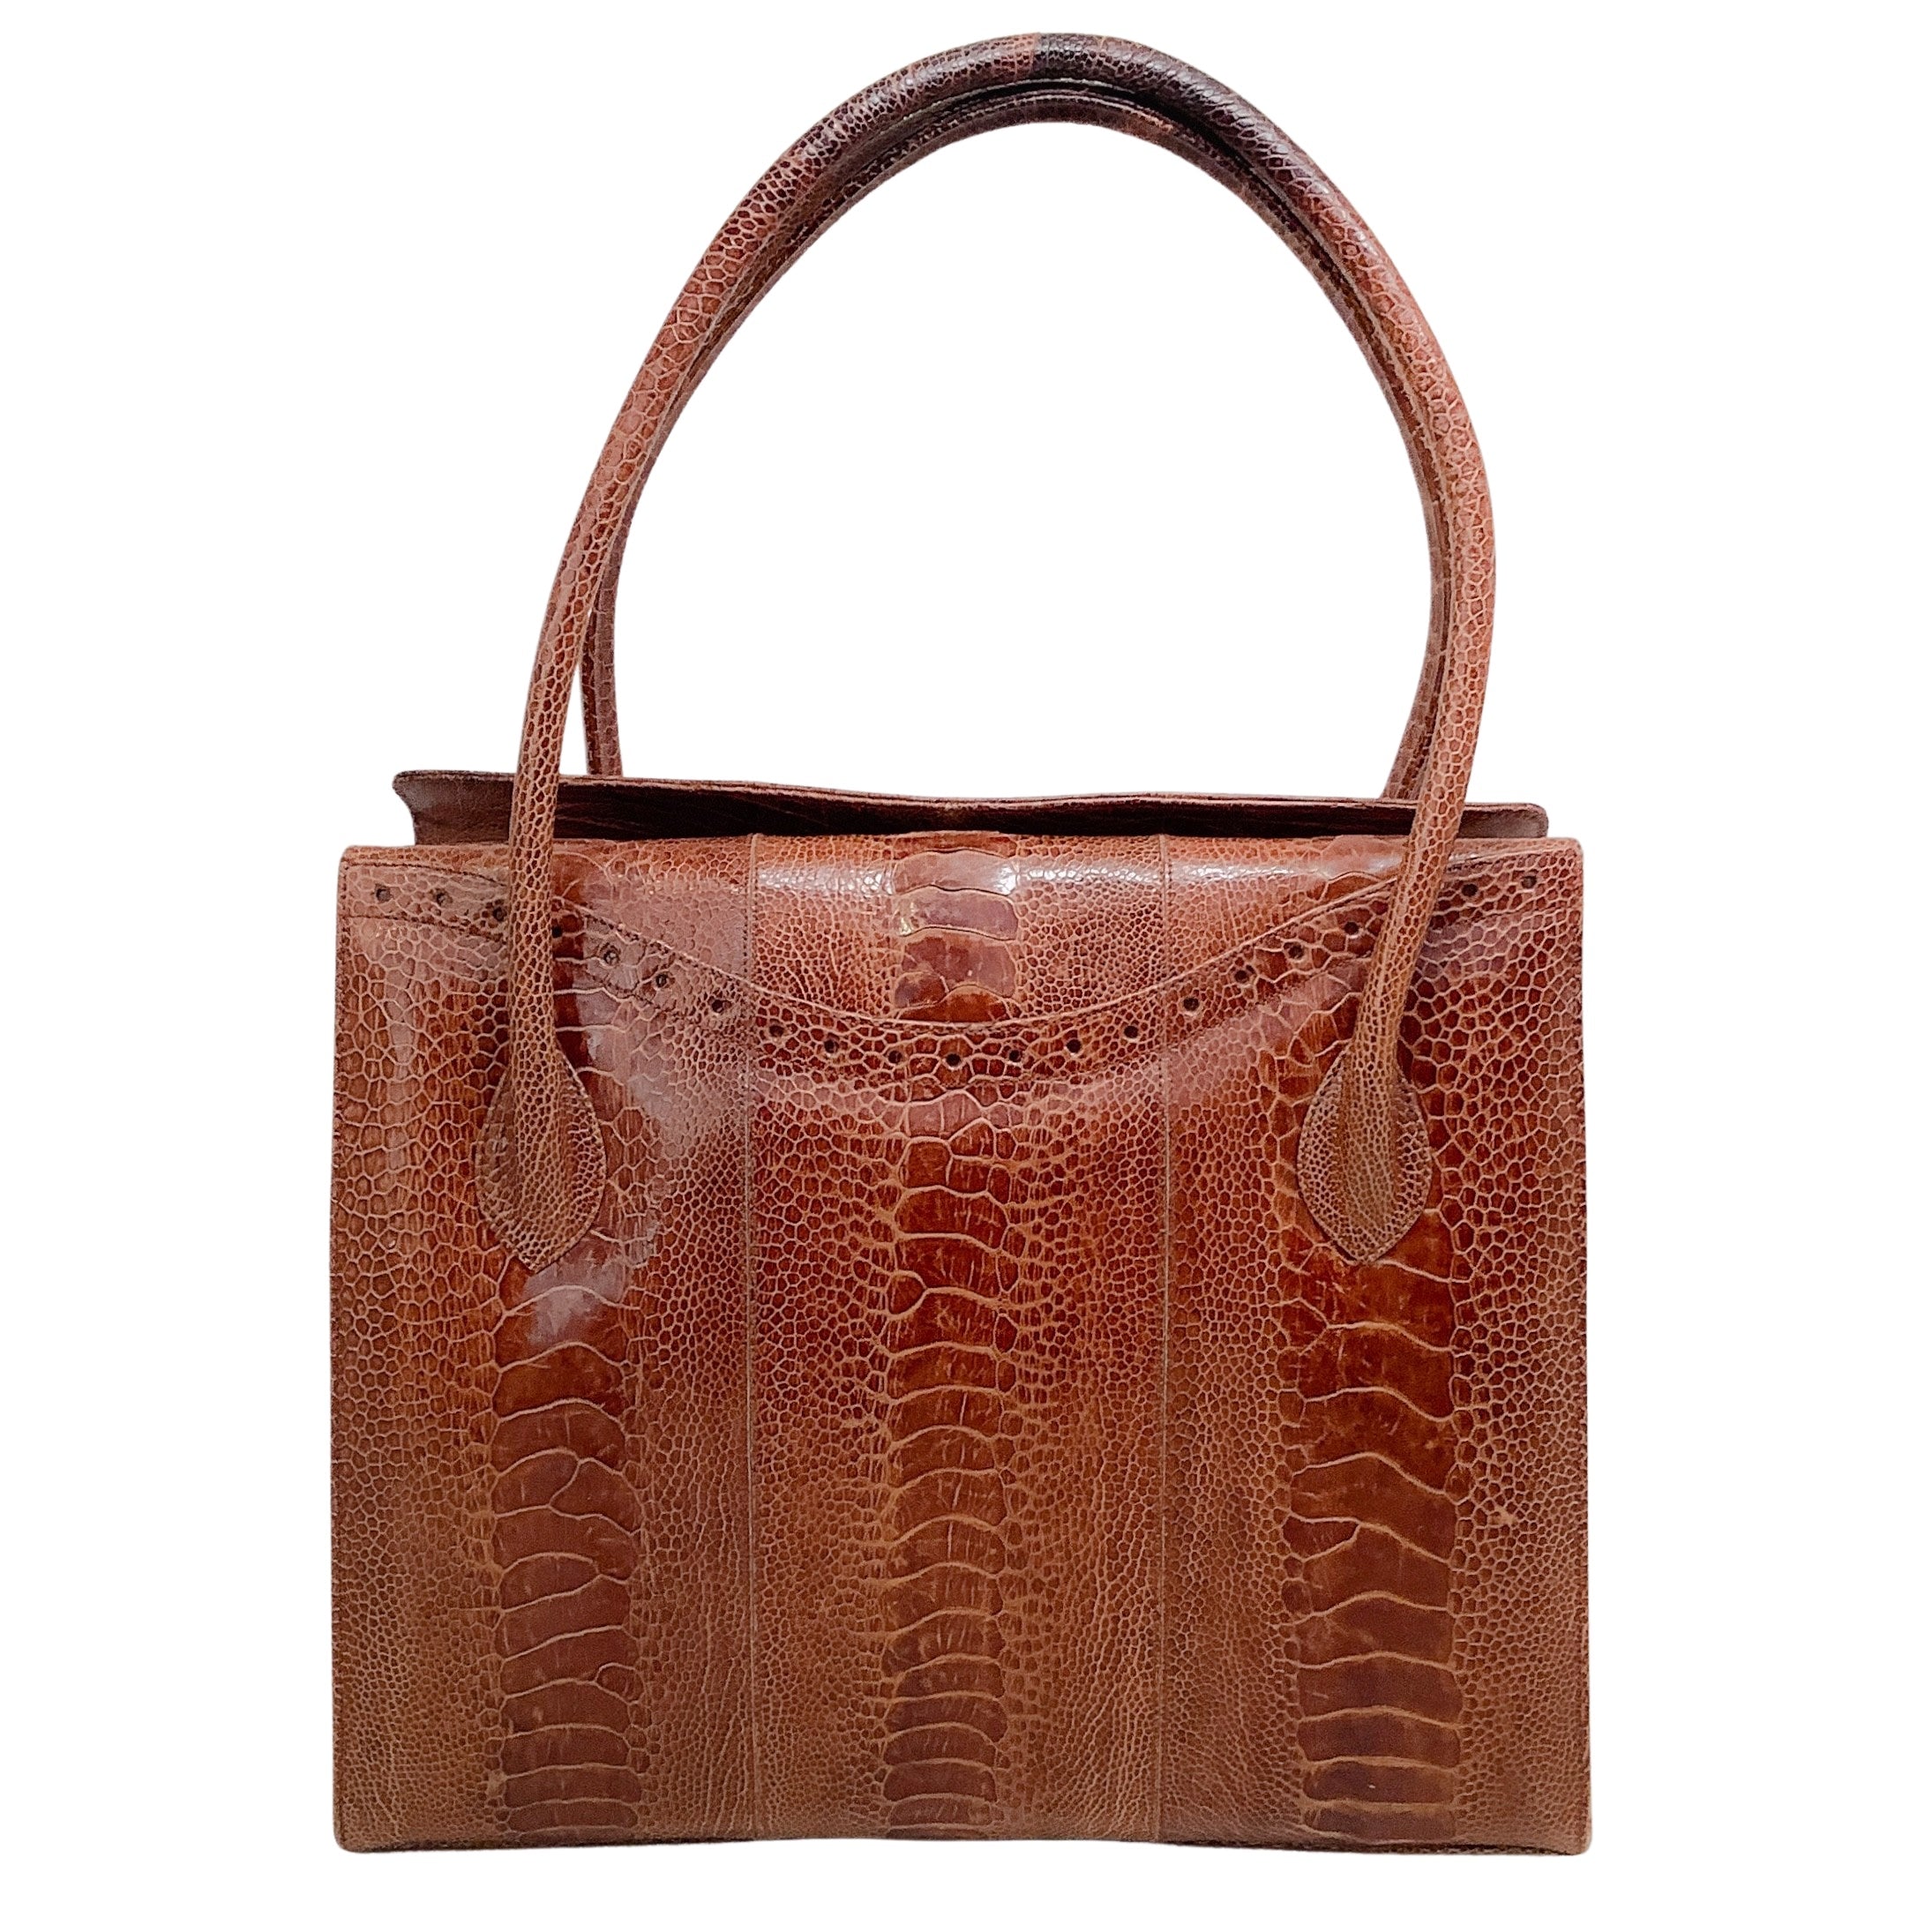 Darby Scott Brown Skin Tote with Jewel Detail